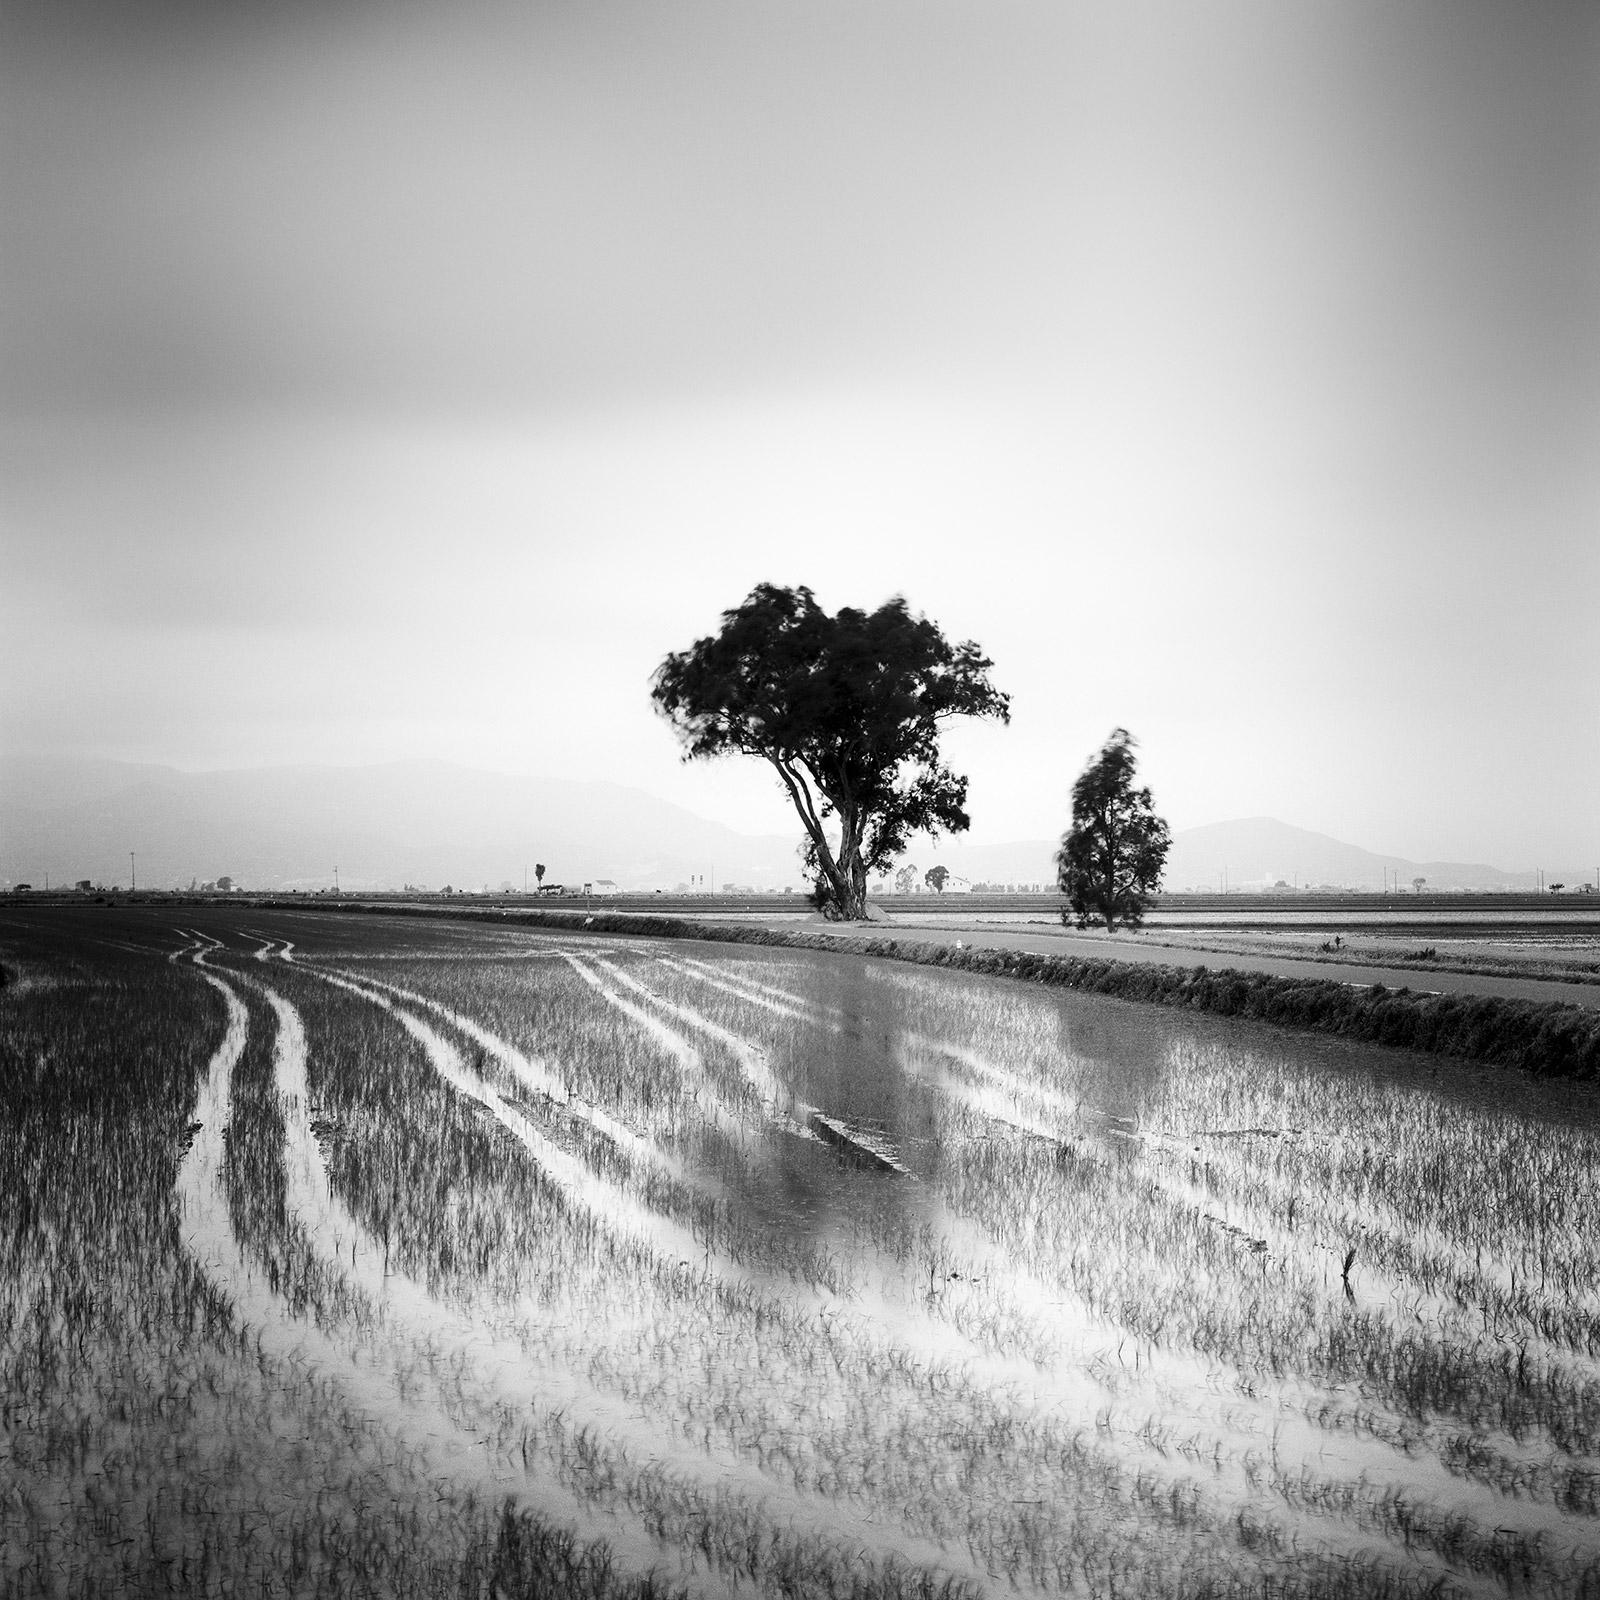 Lines in the Ricefield, Spain, black and white long exposure landscape photo